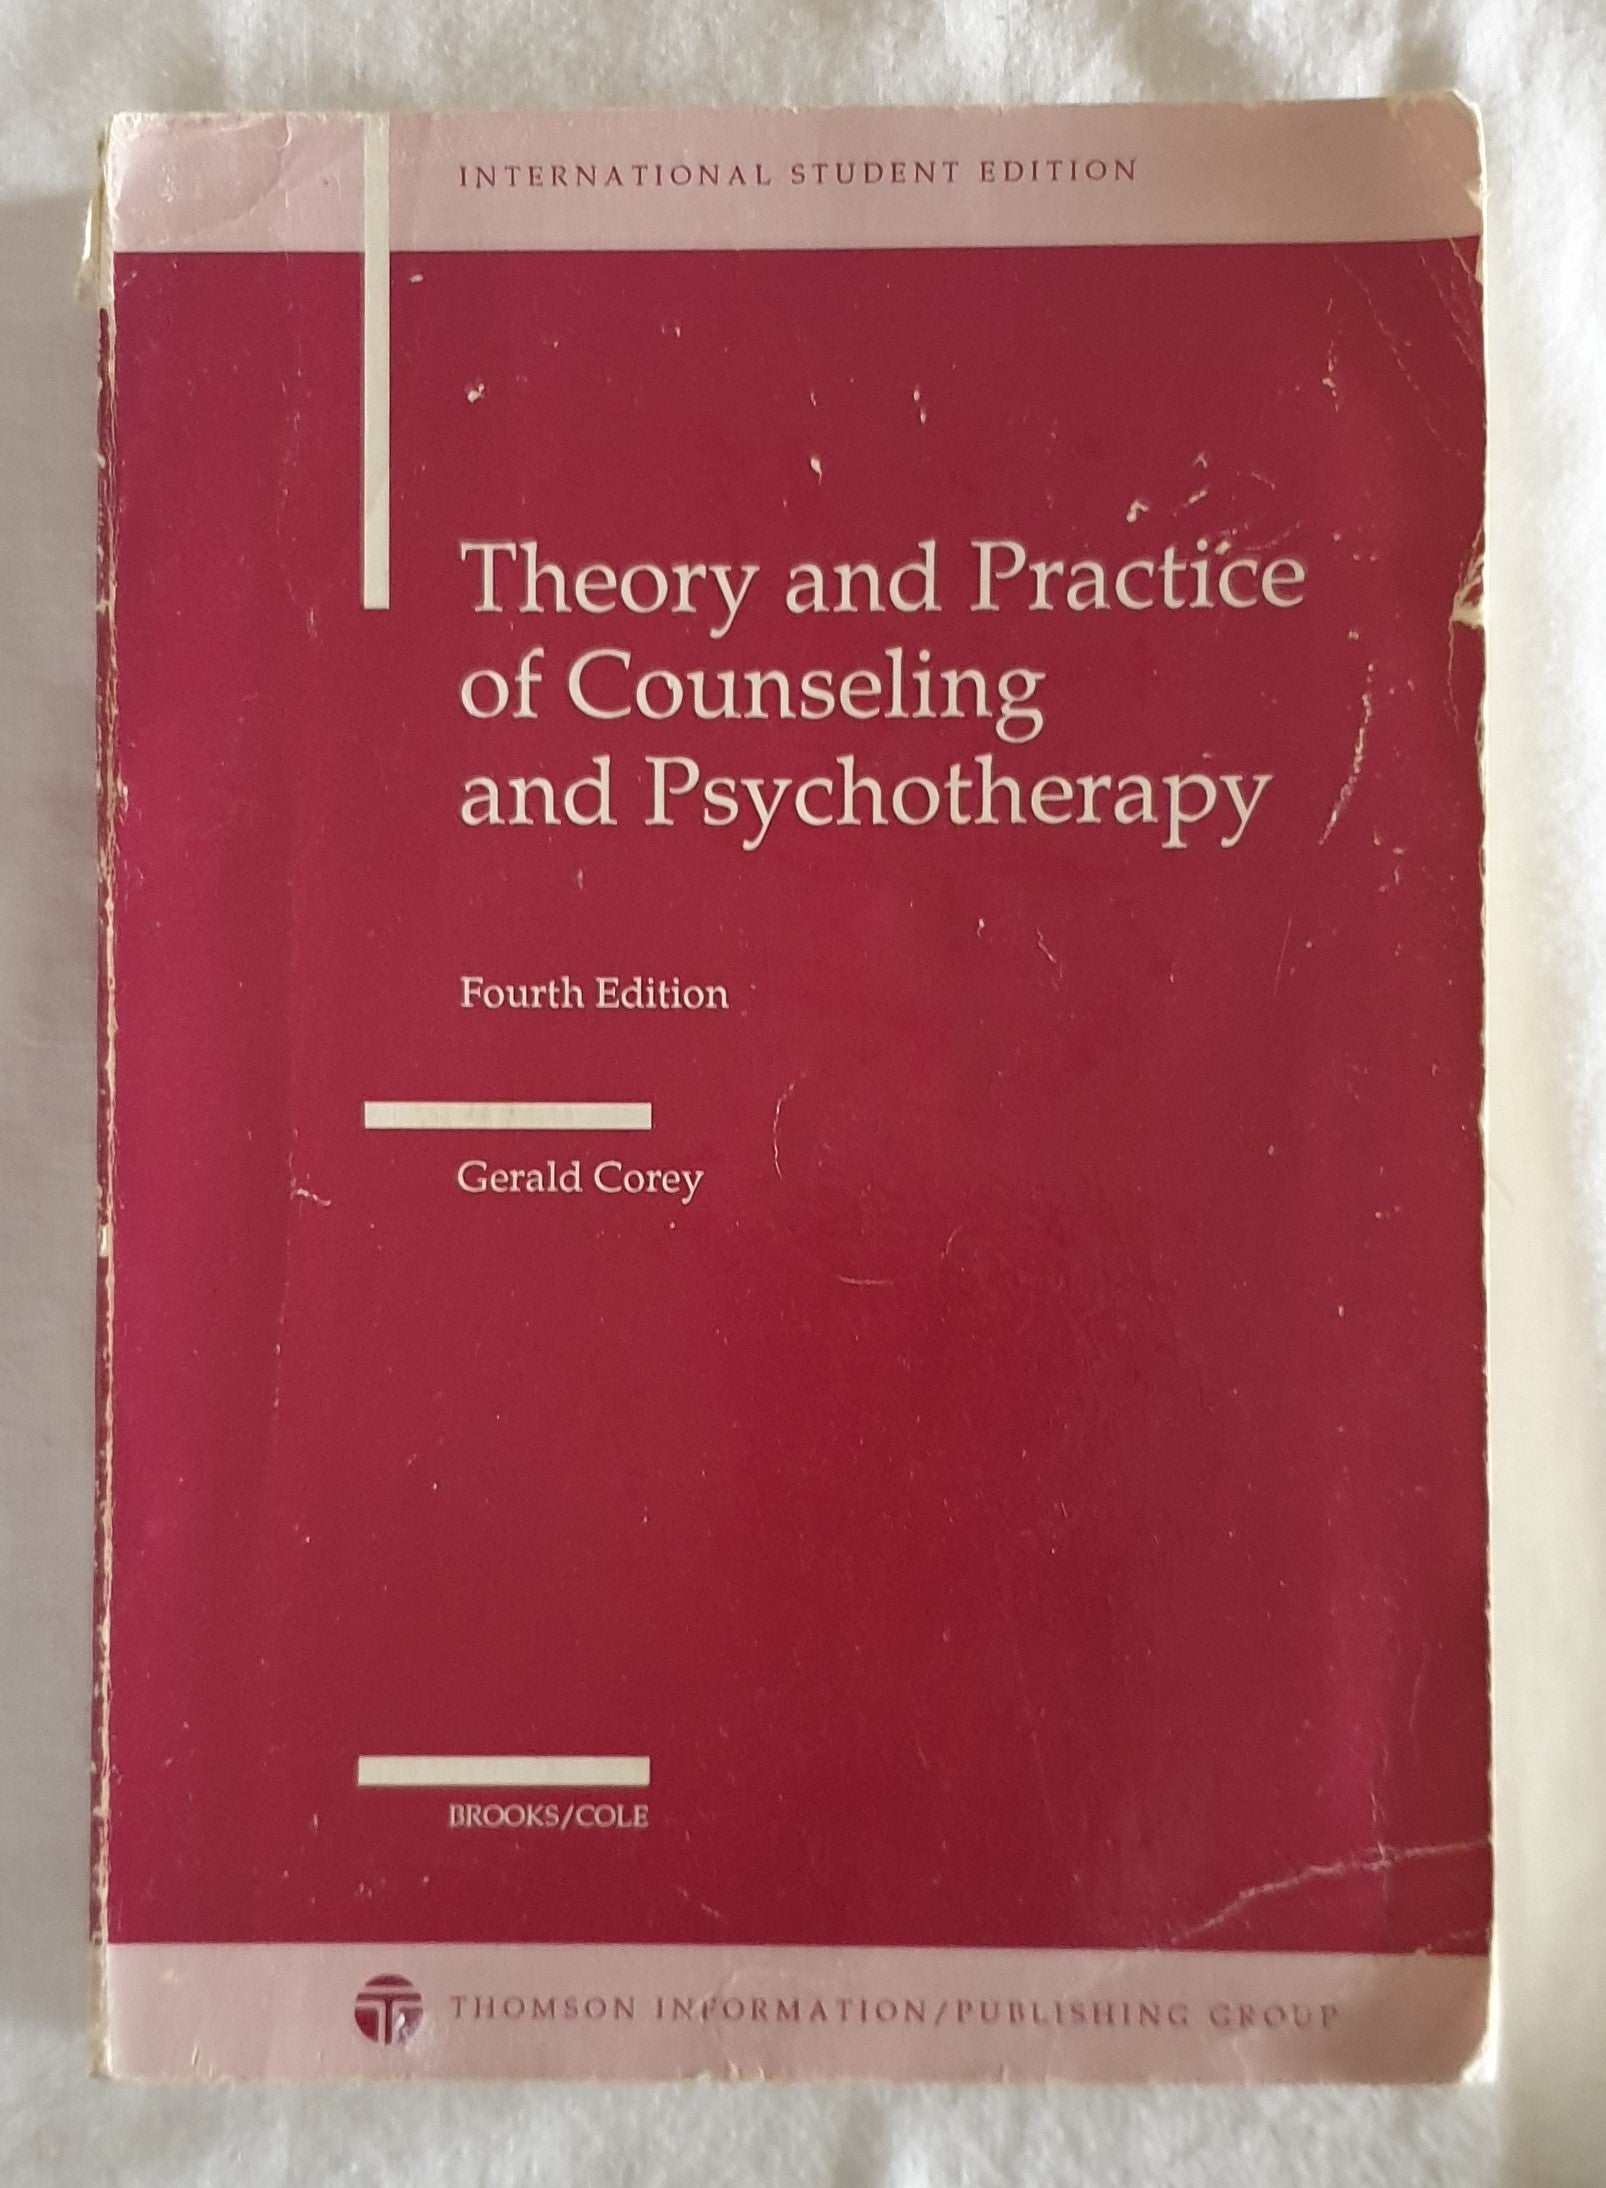 Theory and Practice of Counseling and Psychotherapy by Gerald Corey